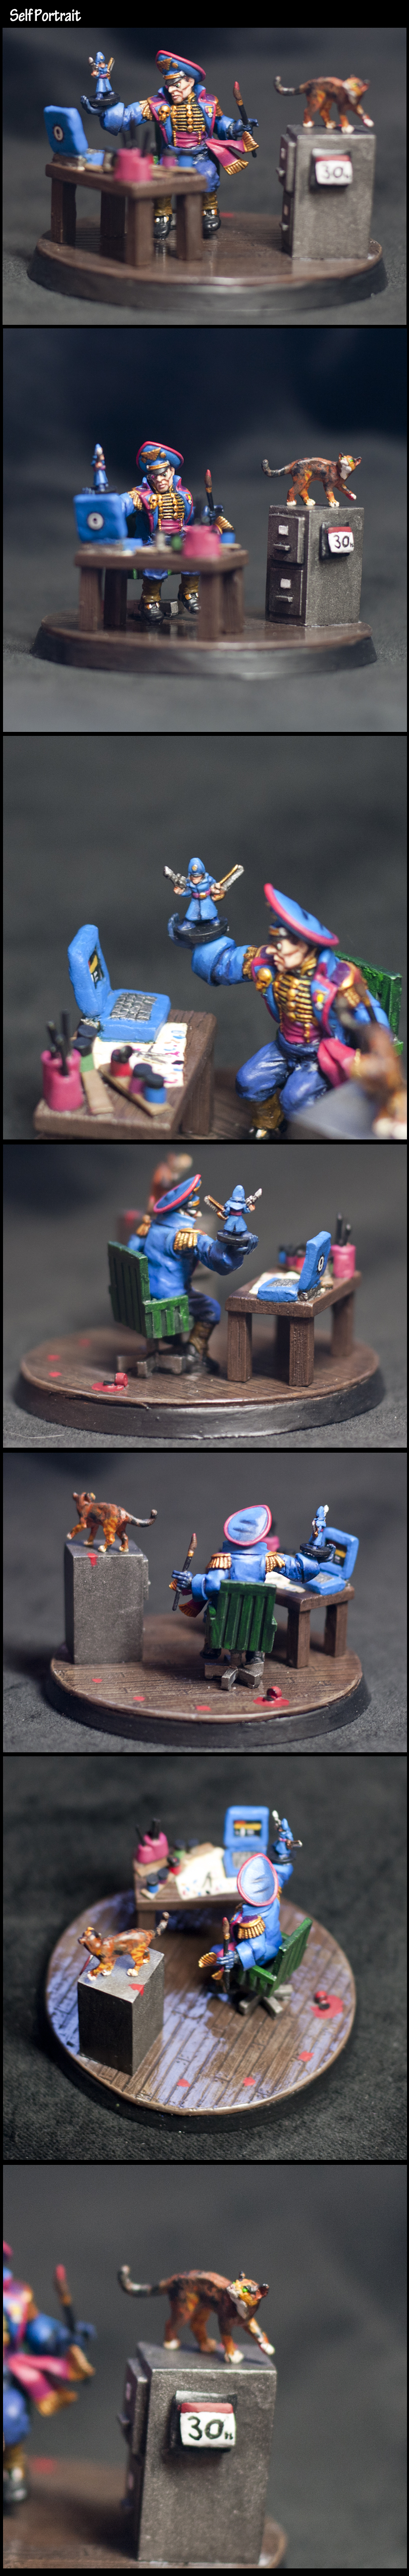 Cat, Commissar, Conversion, Diorama, Gaming, Humour, Modeling, Painting